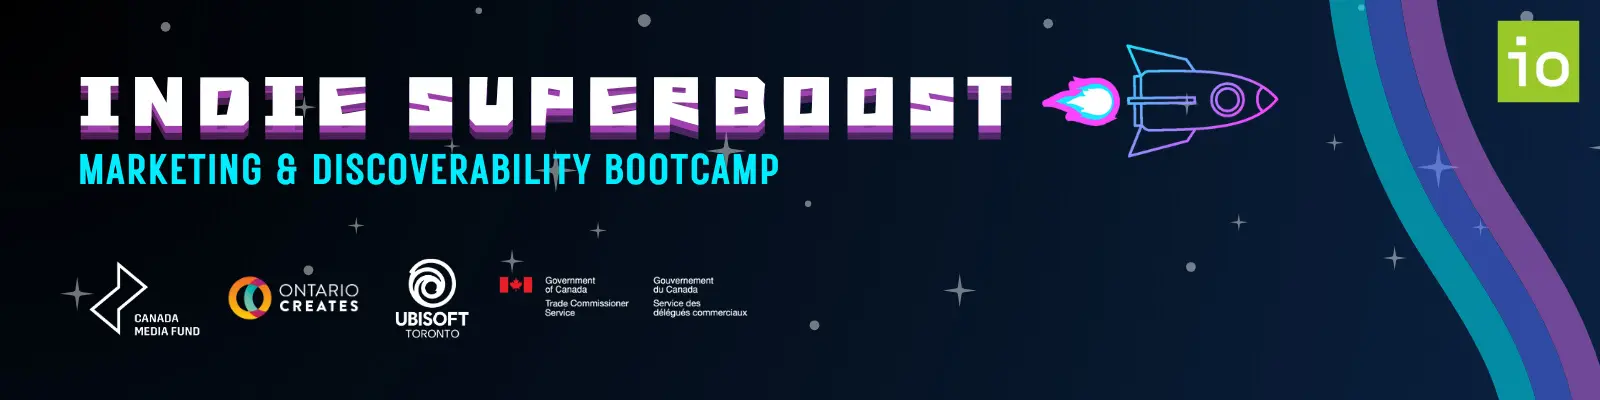 Indie Superboost: Marketing and Discoverability Bootcamp